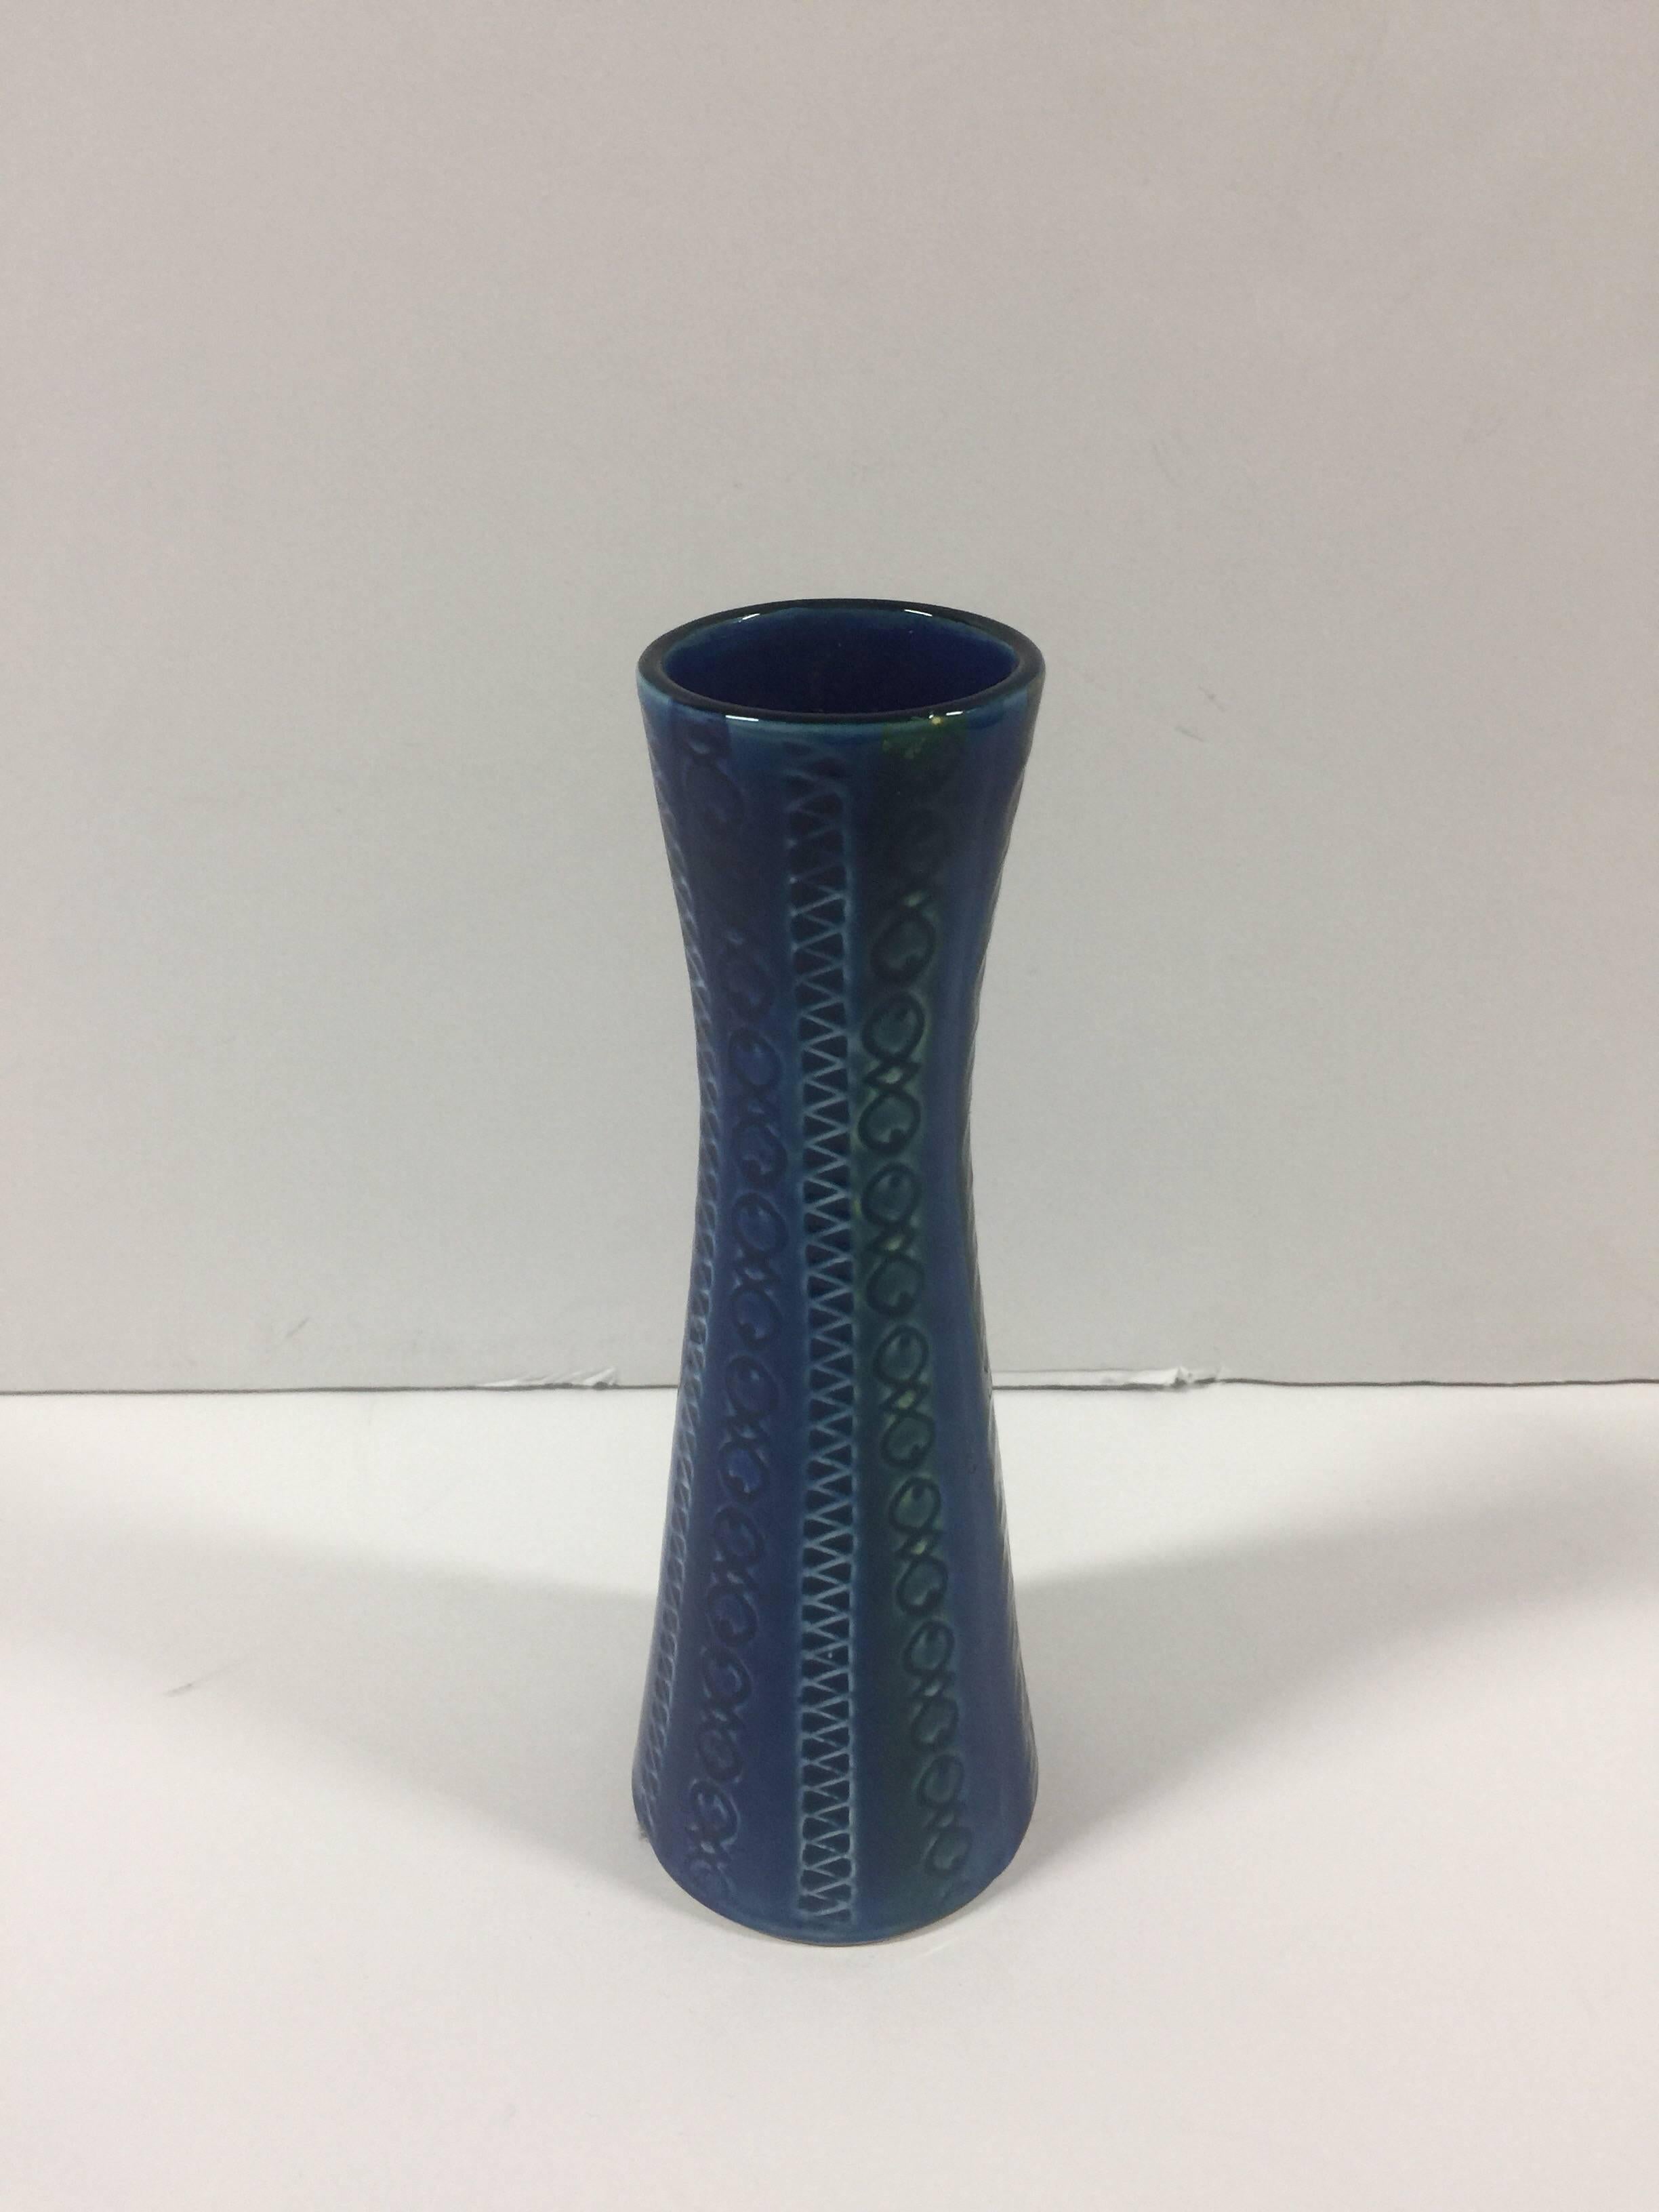 Ceramic bud vase by Bitossi for Raymor, Italy, circa 1960. Features a sgrafitto pattern in blue and black.